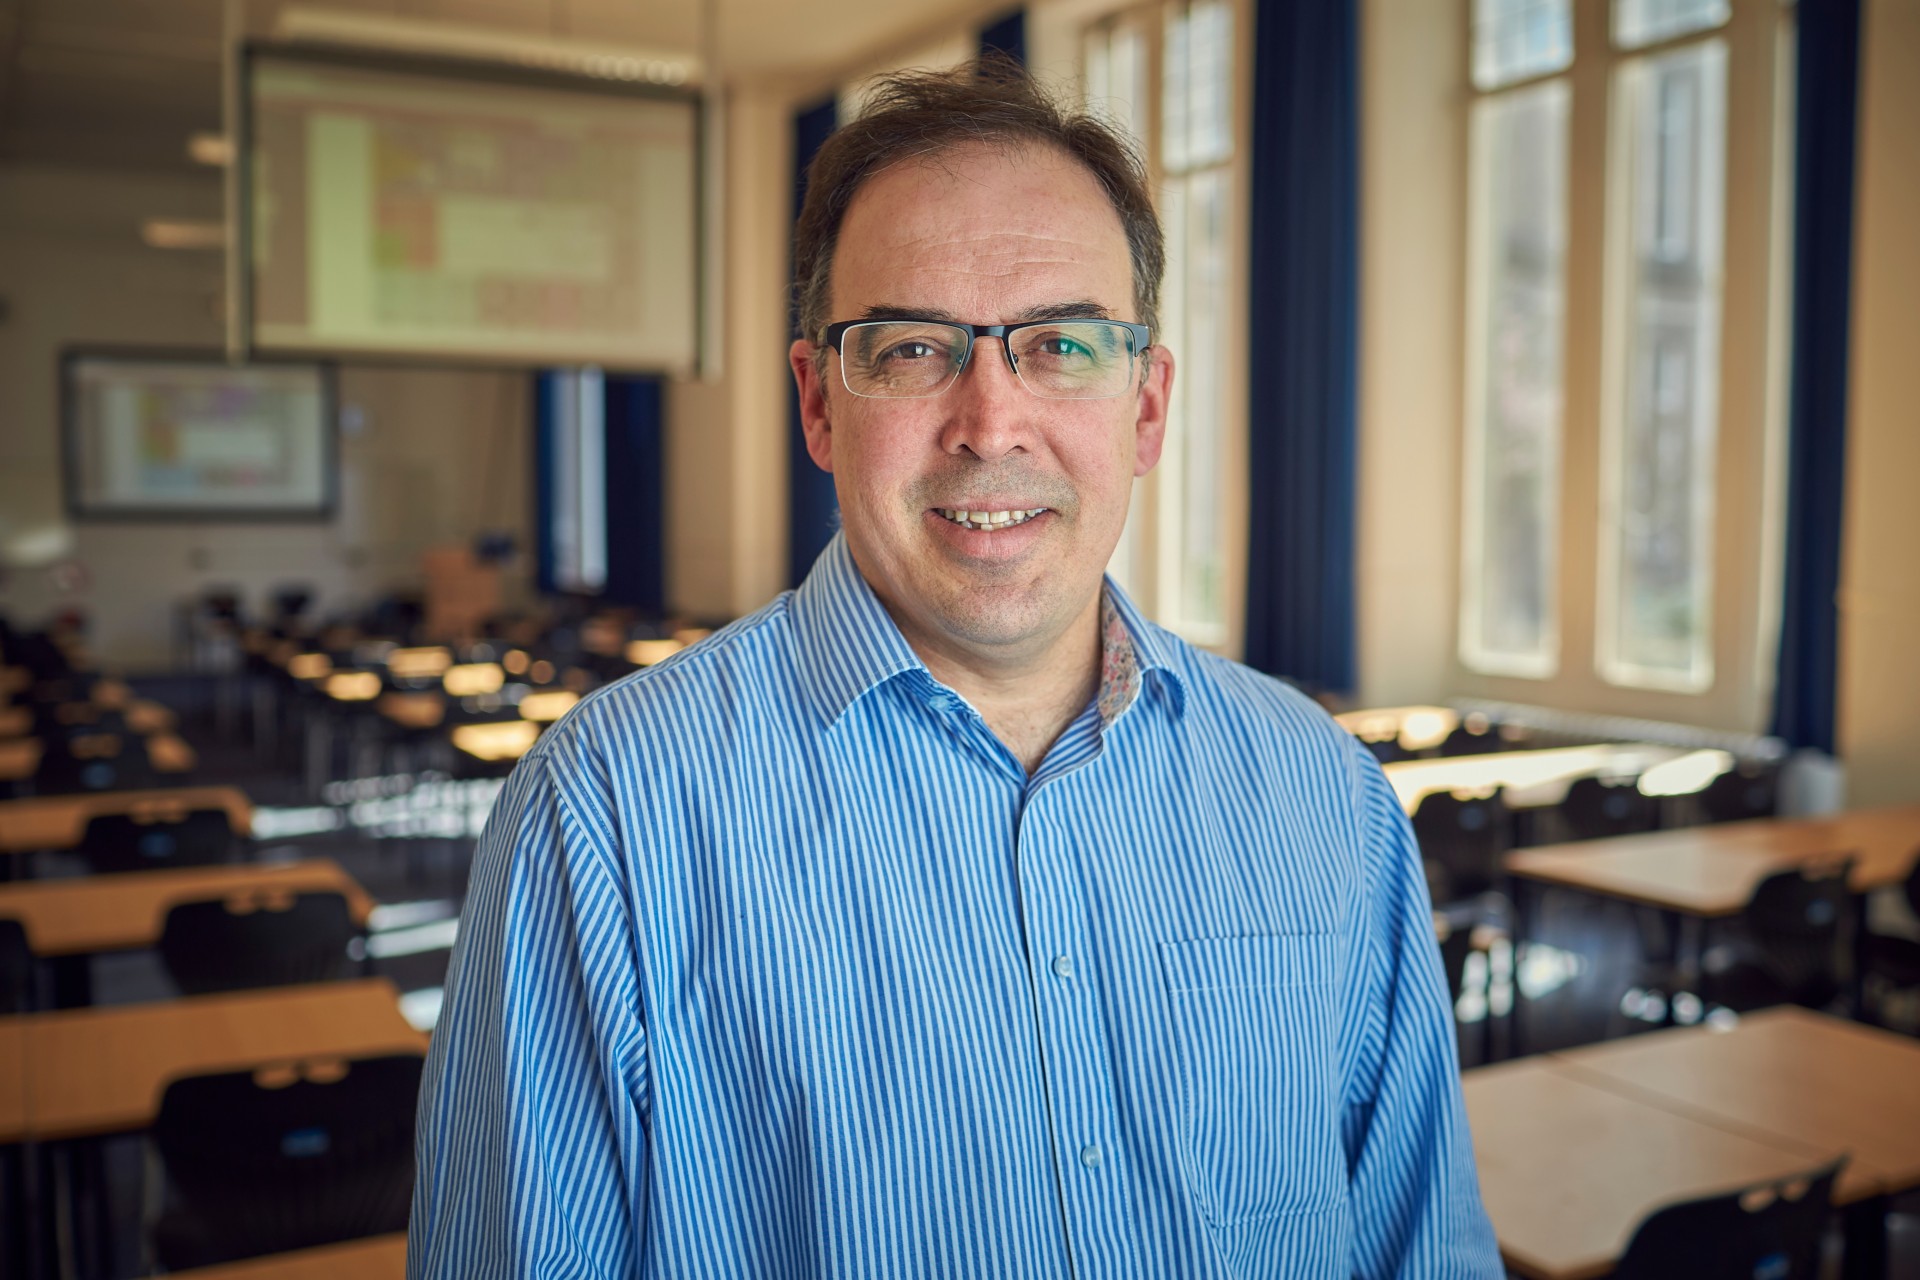 New ranking places Professor David Lavallee among top academics in his field